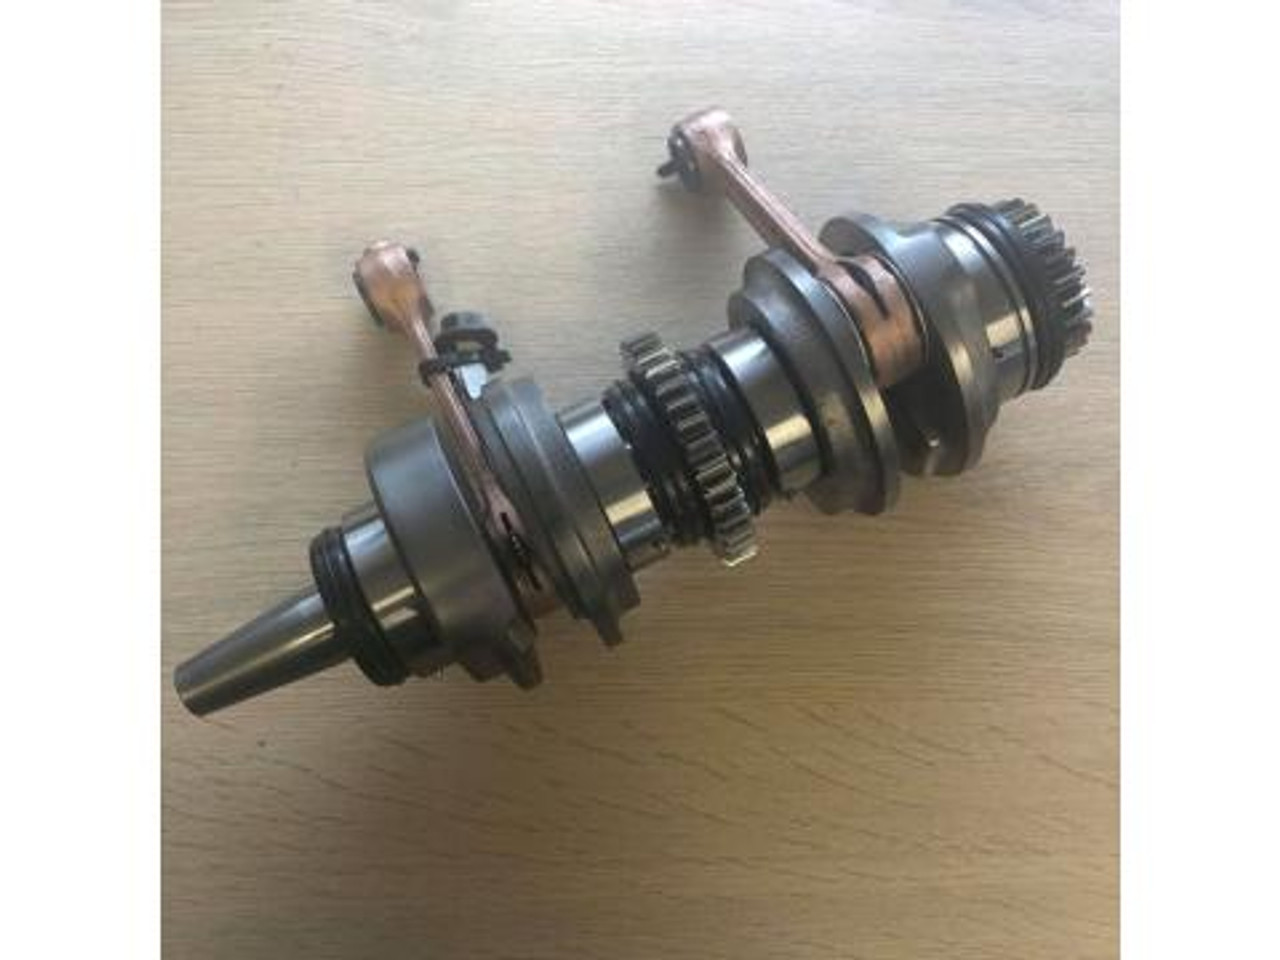 Crank Rebuild labour Cost for all twin cylinder motorcycles, the crank is cleaned, rebuilt and balanced to higher accuracy than manufacturer specification. Shipping Cost is for return shipping.